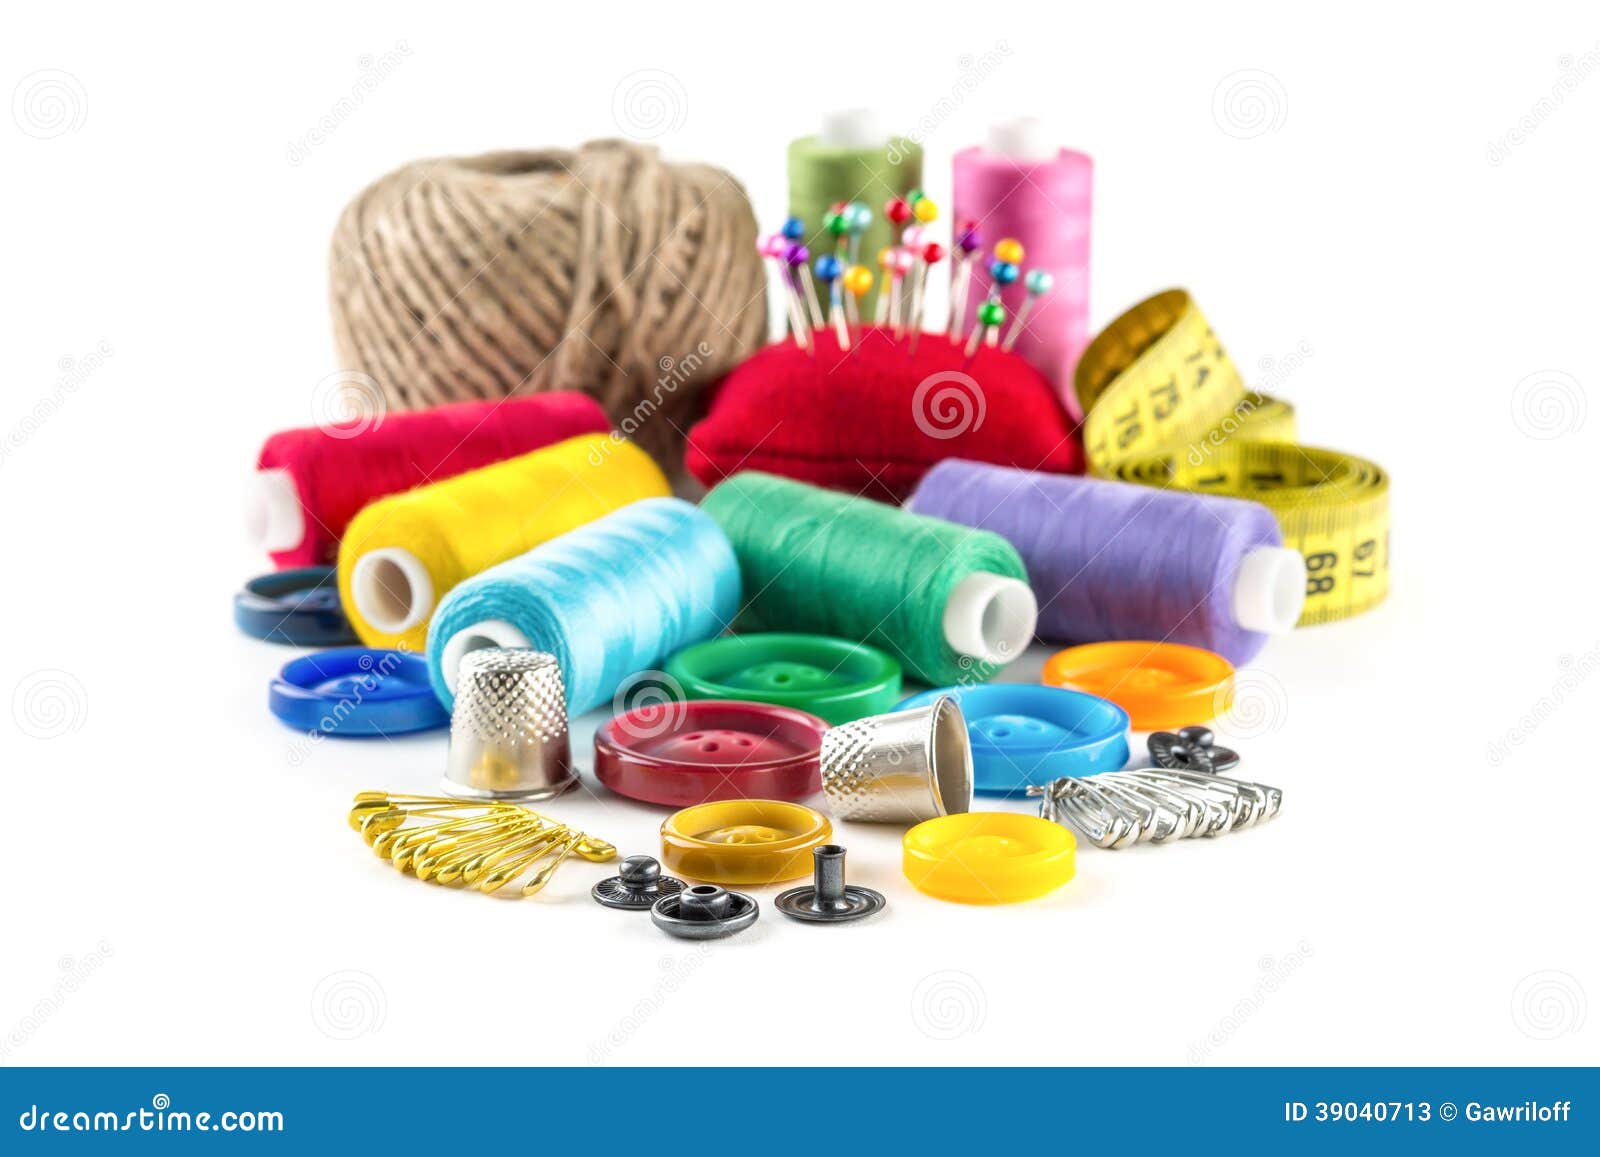 Tools for Sewing: Button, Thimble, Pins Stock Image - Image of ribbon ...